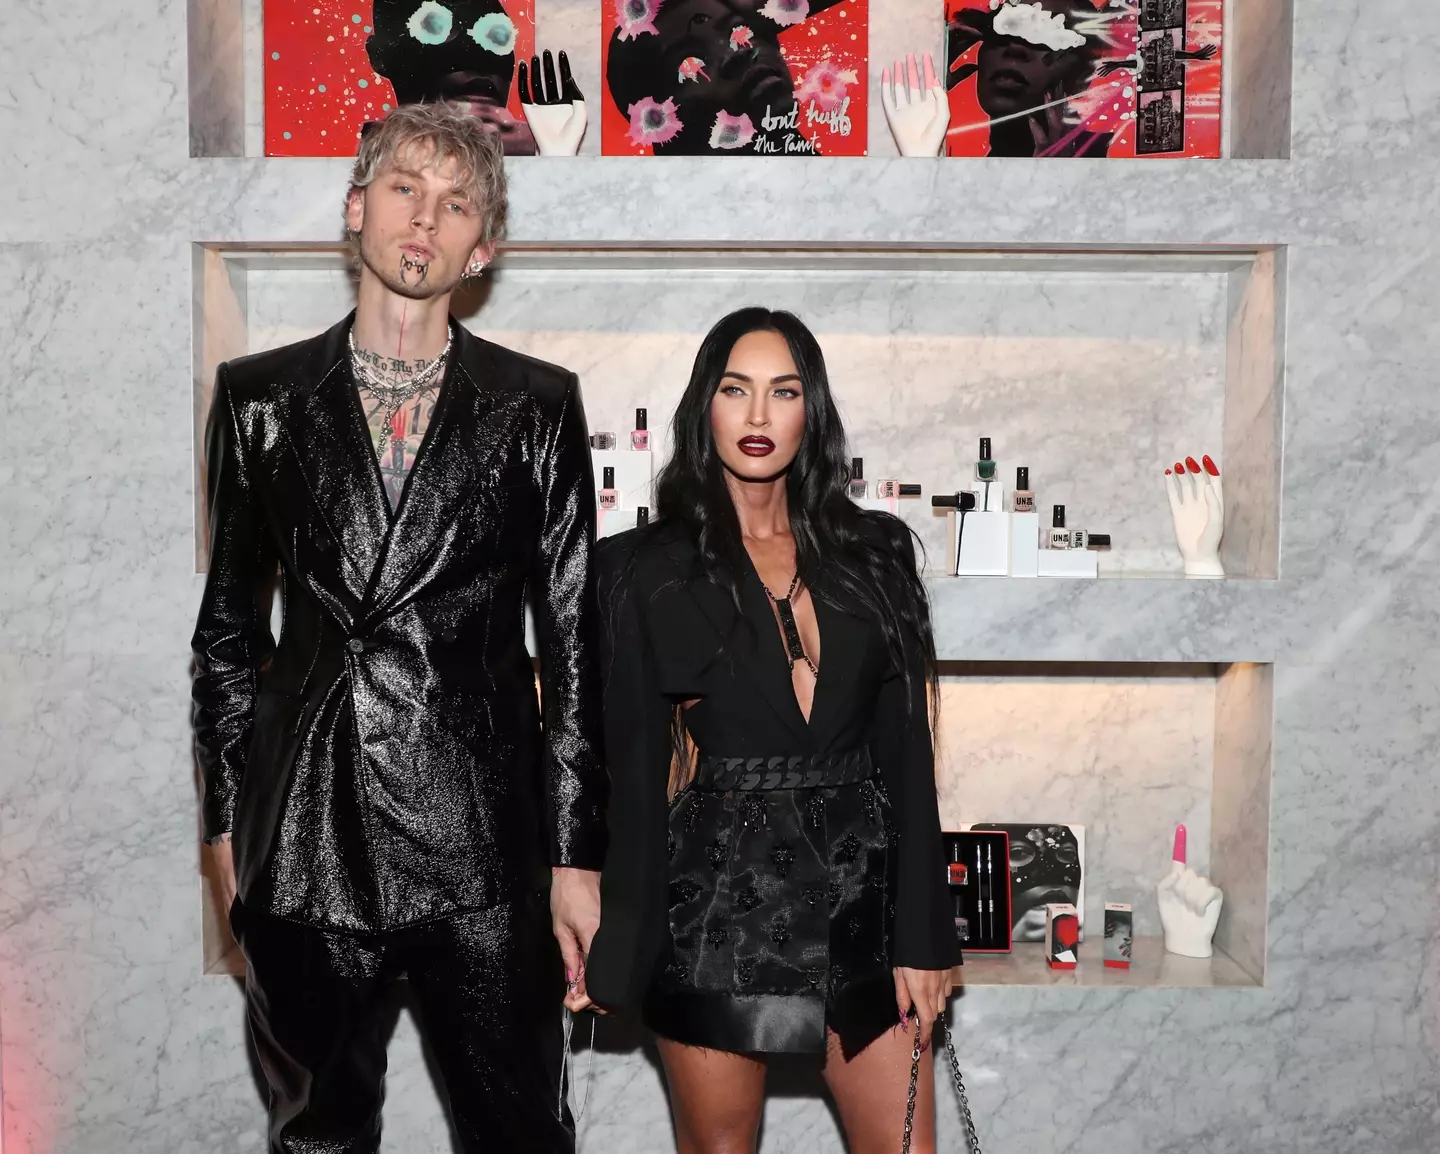 While they're no longer engaged, Megan Fox said Machine Gun Kelly would always be 'my twin soul'. (Jerritt Clark/Getty Images for Machine Gun Kelly's UN/DN LAQR)